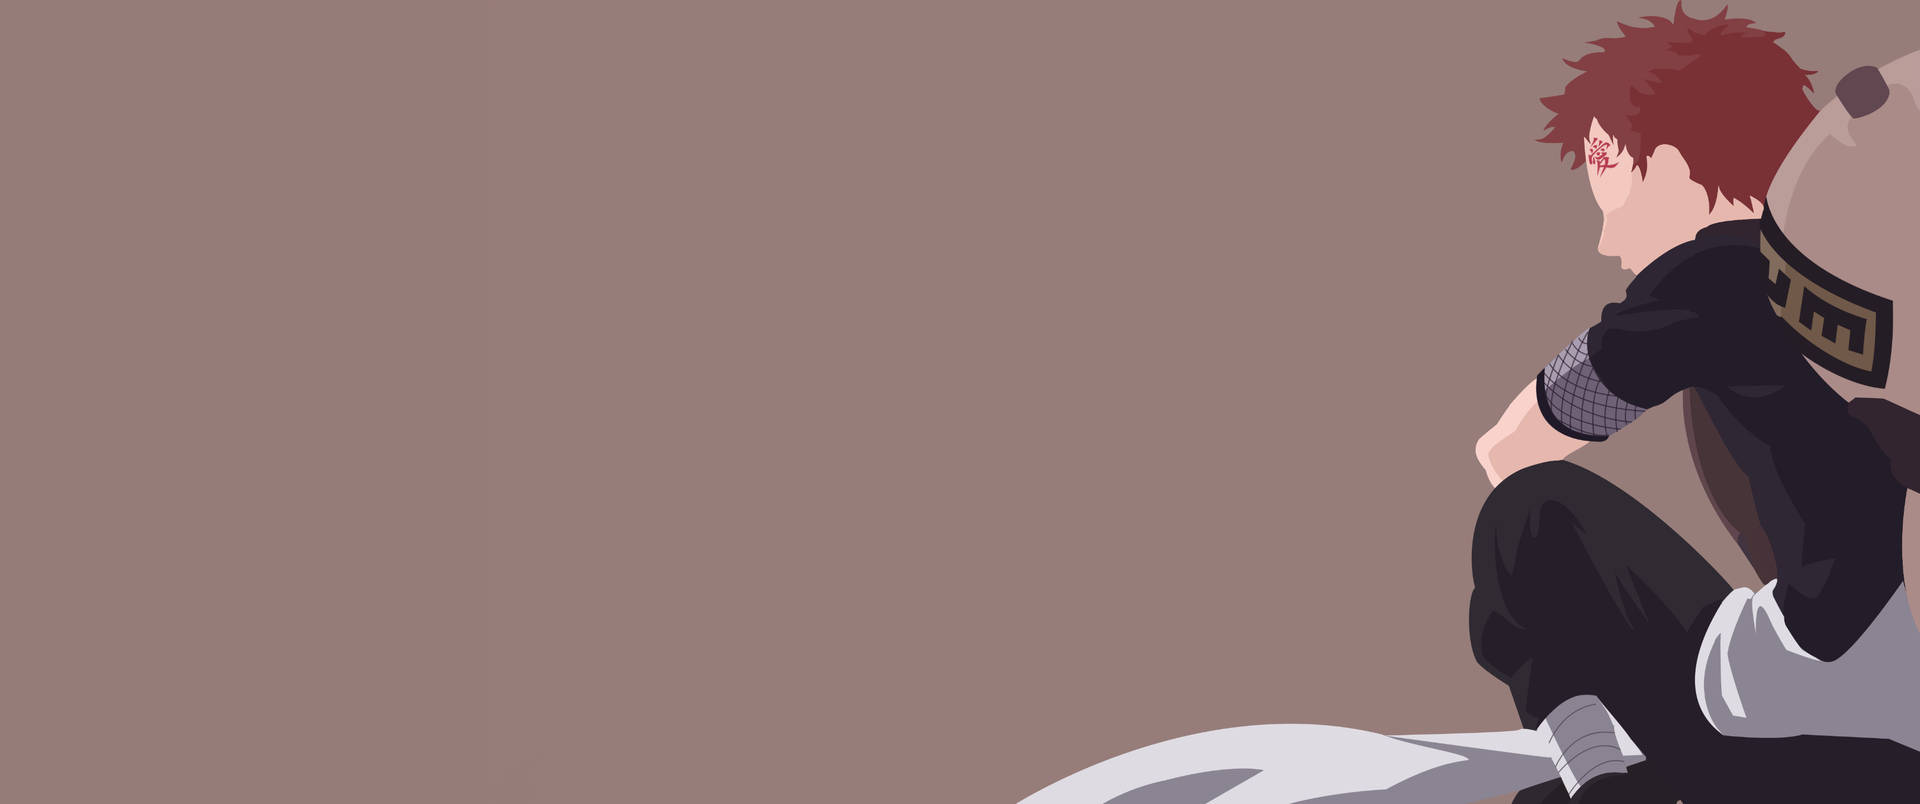 Gaara 3440X1440 Wallpaper and Background Image